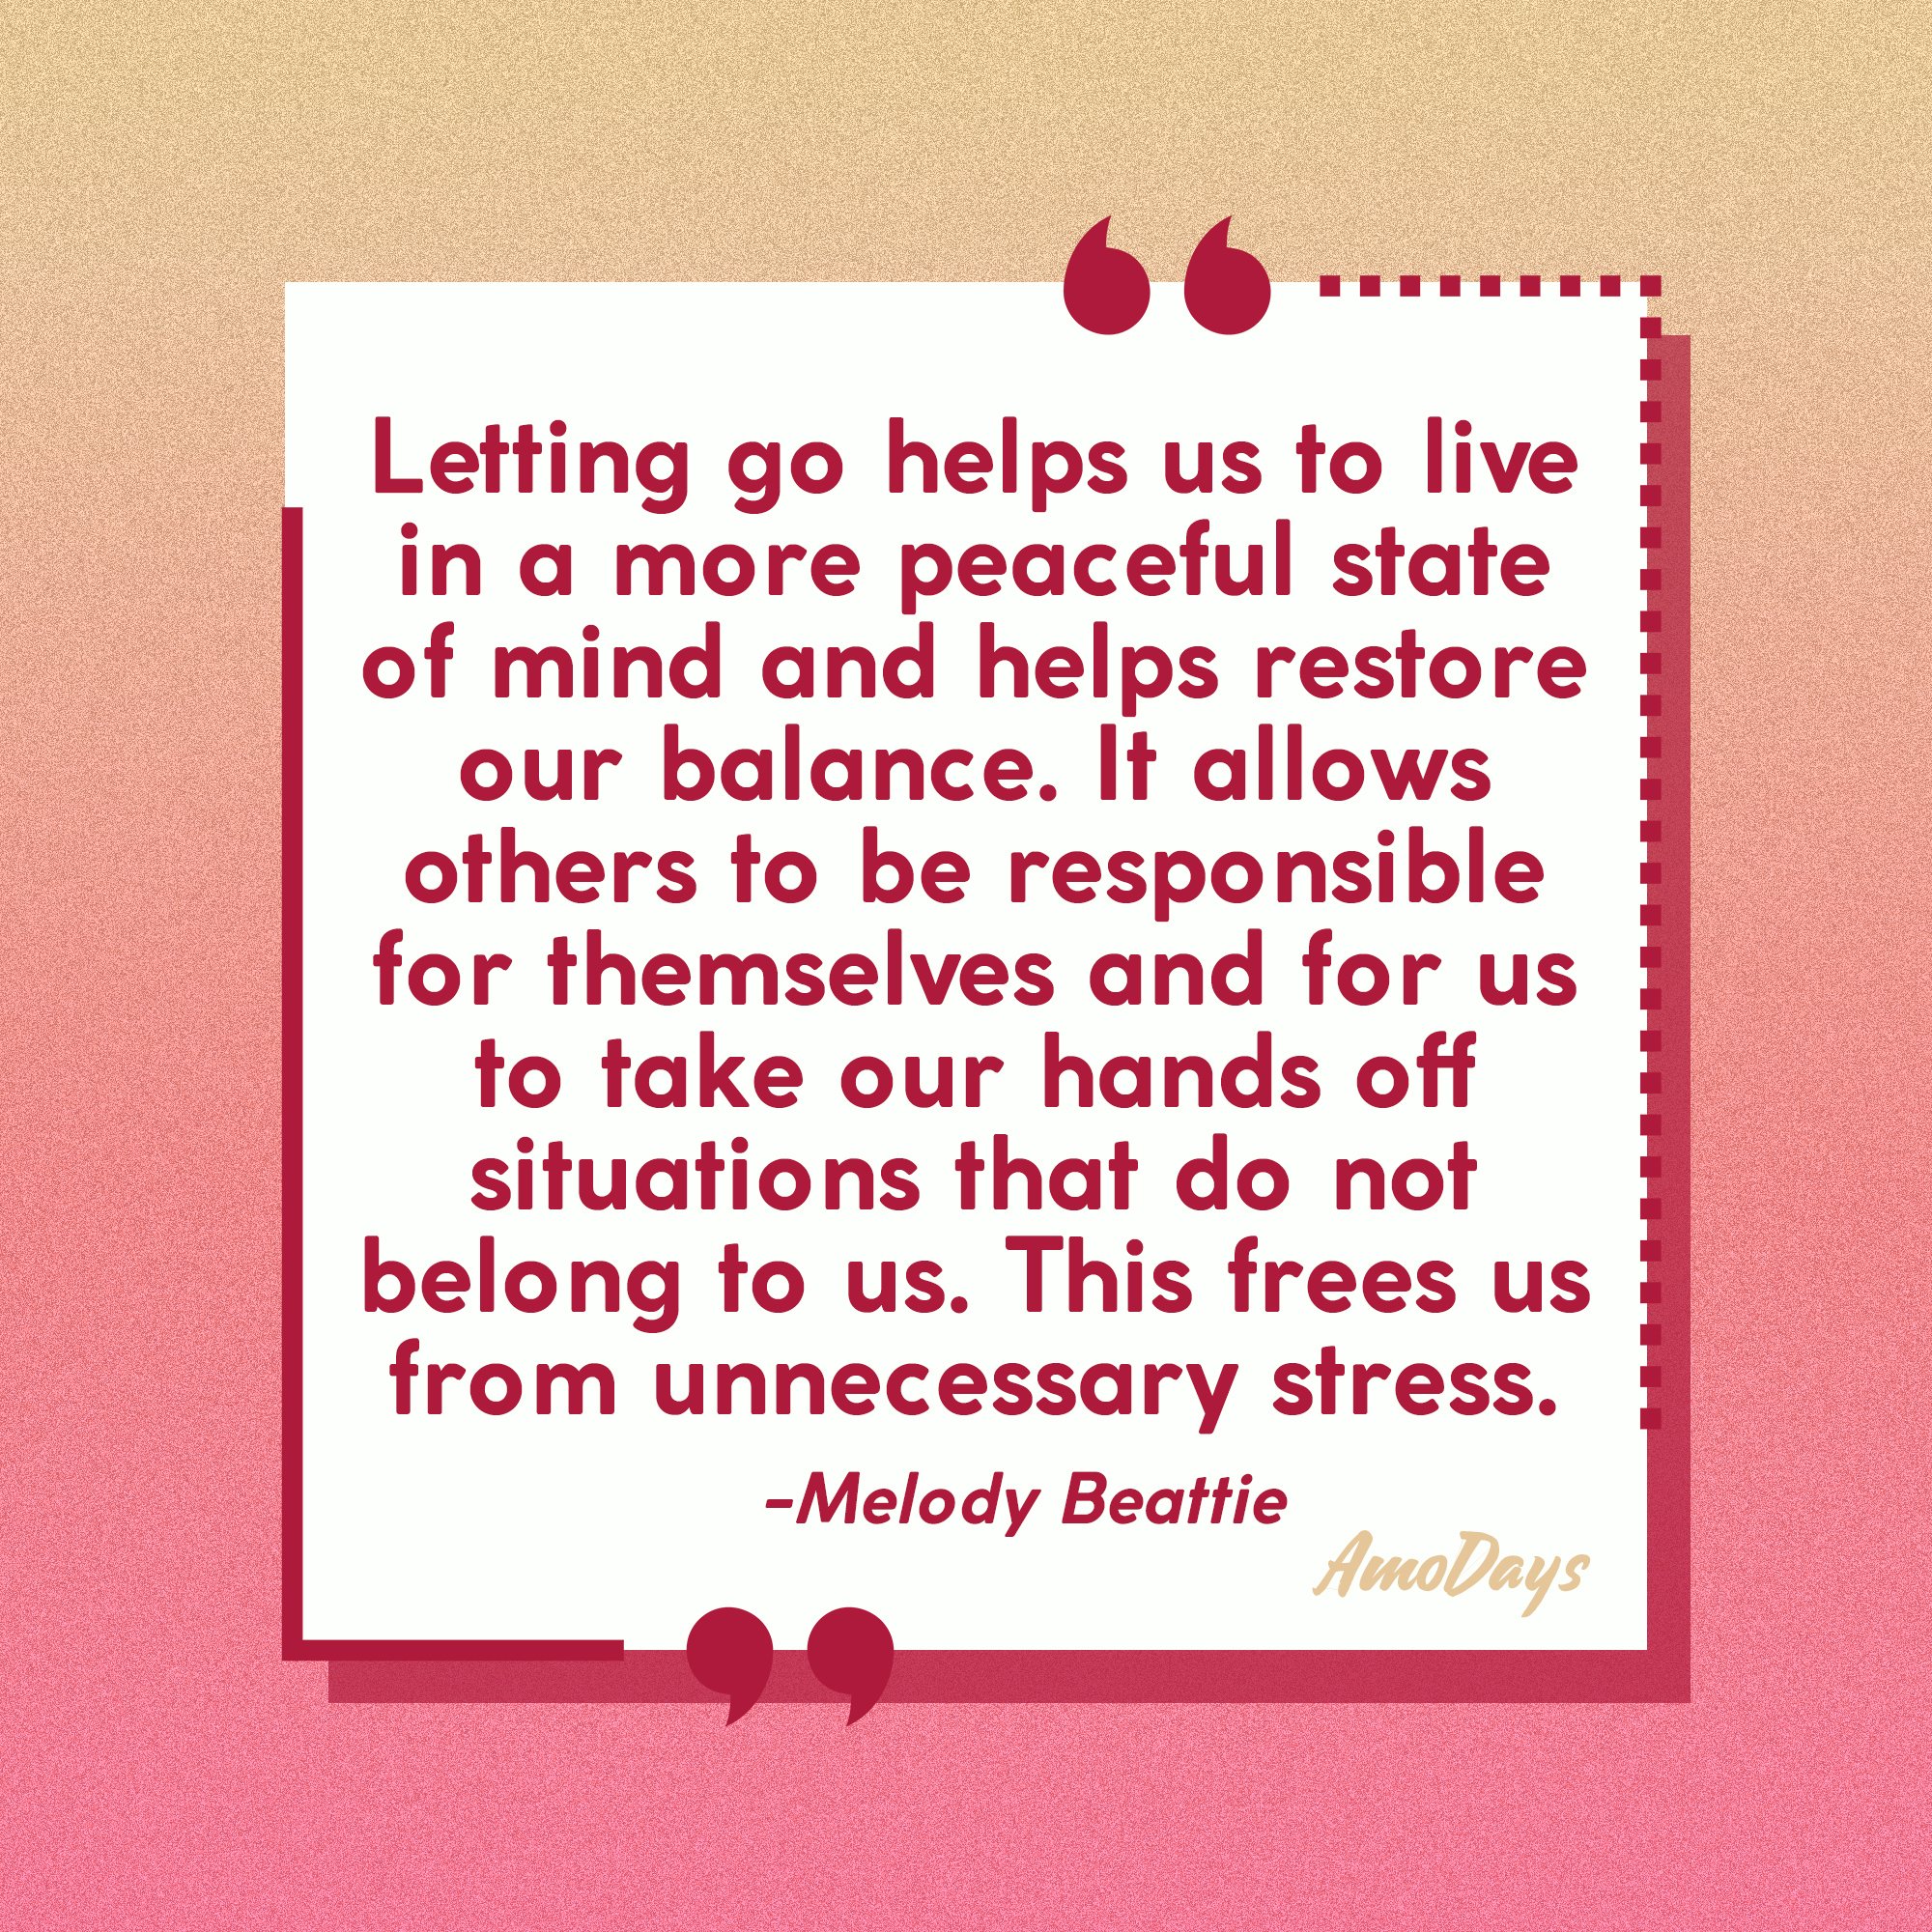 Melody Beattie's quote: “Letting go helps us to live in a more peaceful state of mind and helps restore our balance. It allows others to be responsible for themselves and for us to take our hands off situations that do not belong to us. This frees us from unnecessary stress.” | Image: Amodays